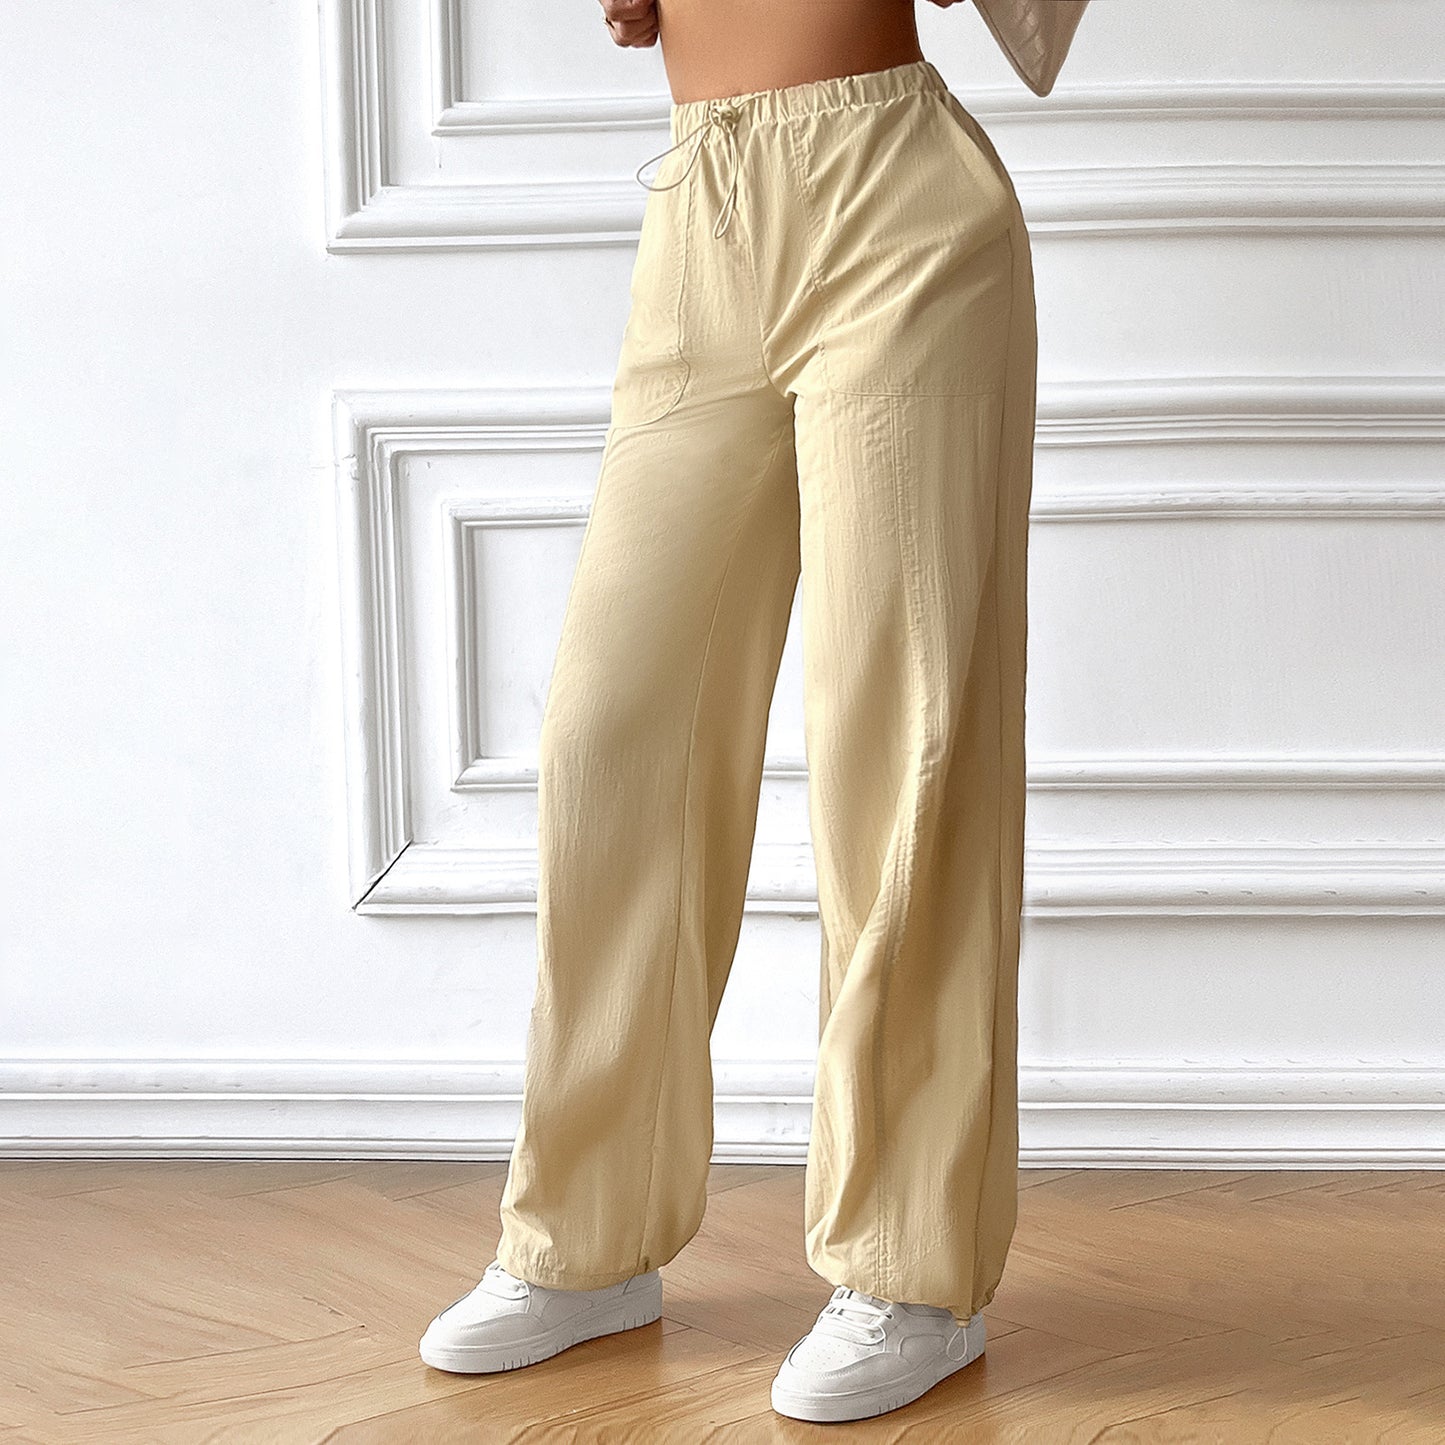 Women's Fashion Casual Loose-fitting Wide-leg Trousers